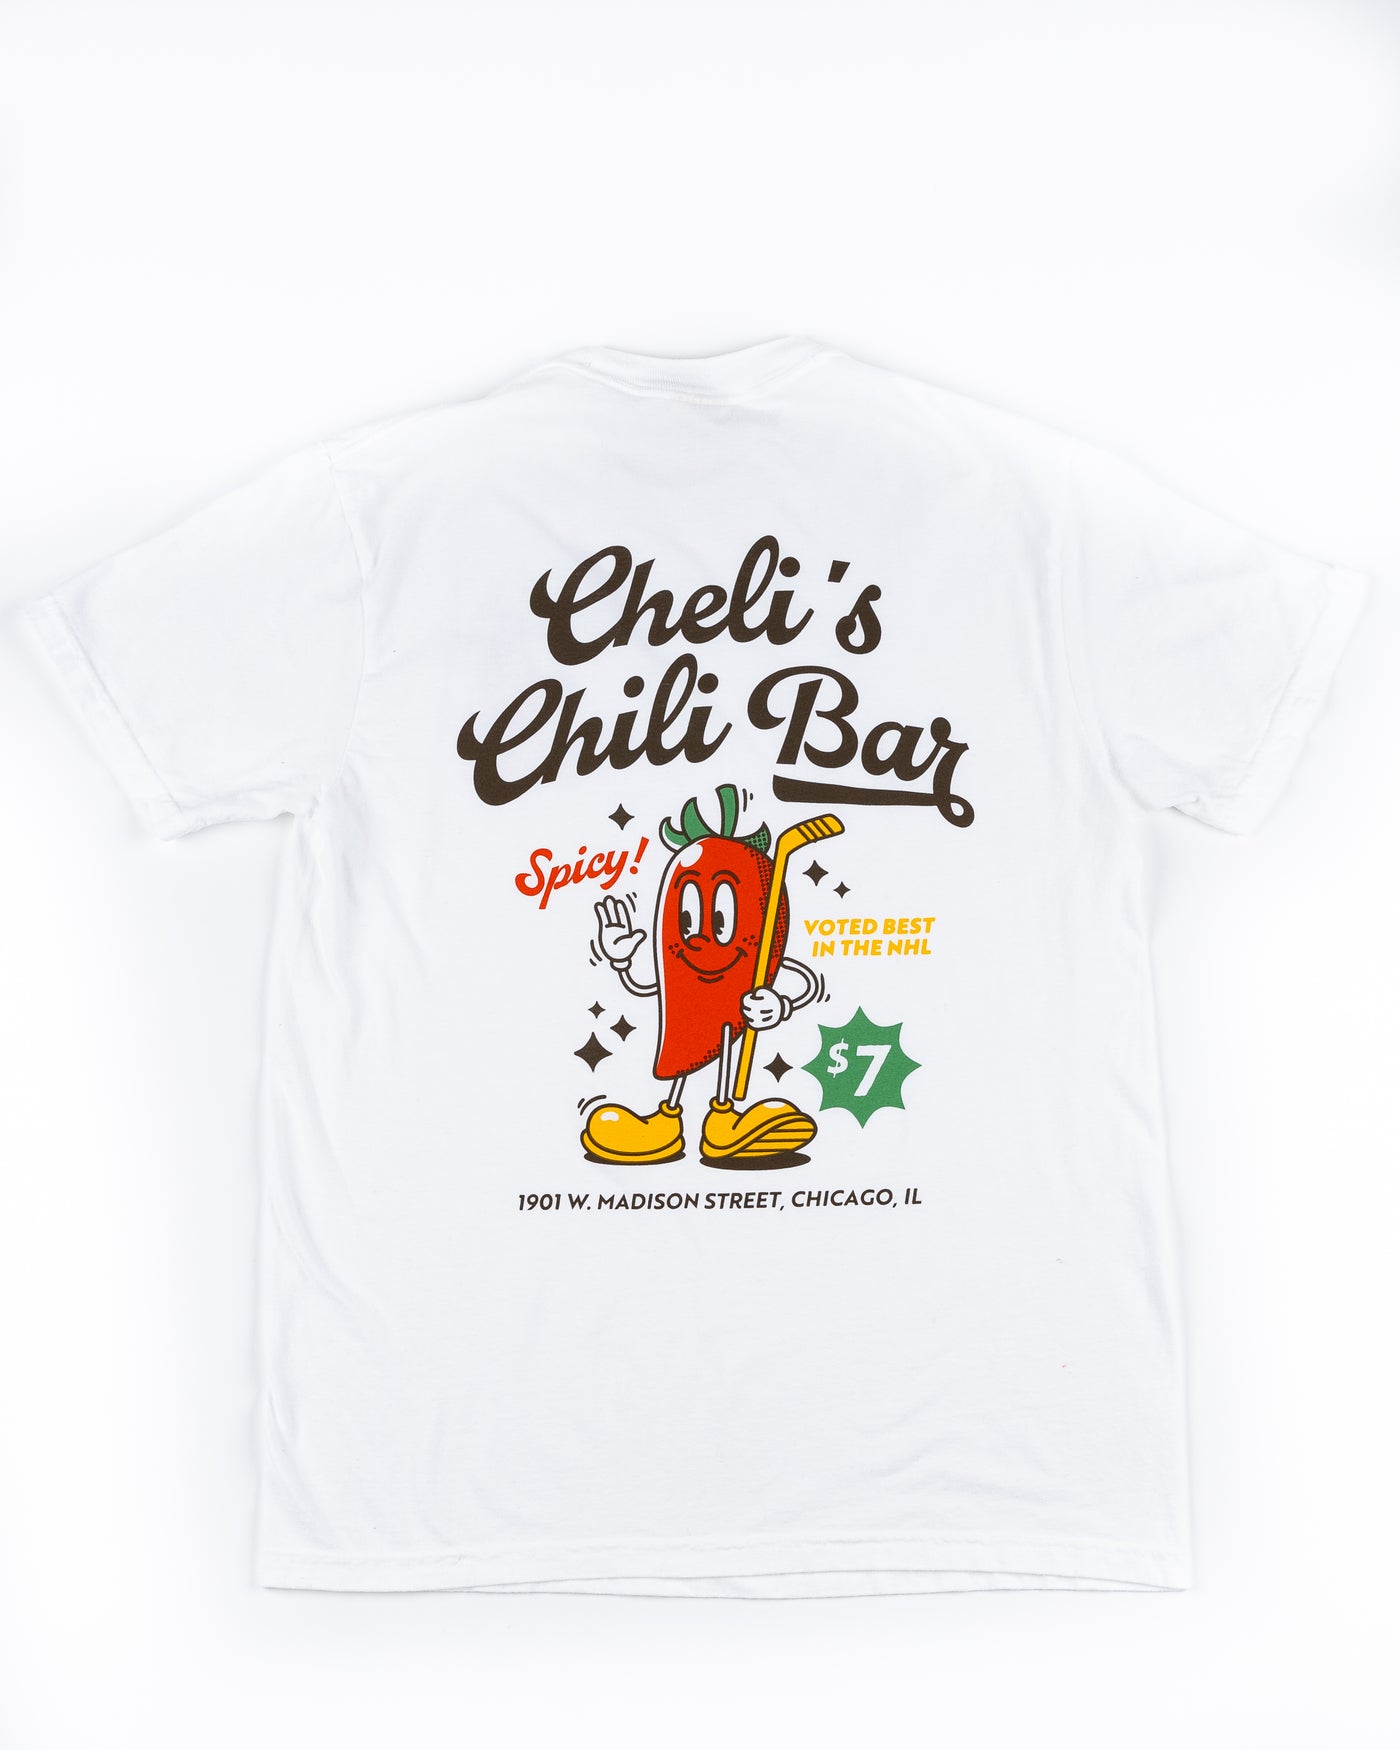 white tee with Cheli's Chili Bar branding and graphics on back and chili pepper mascot on left front - back  lay flat